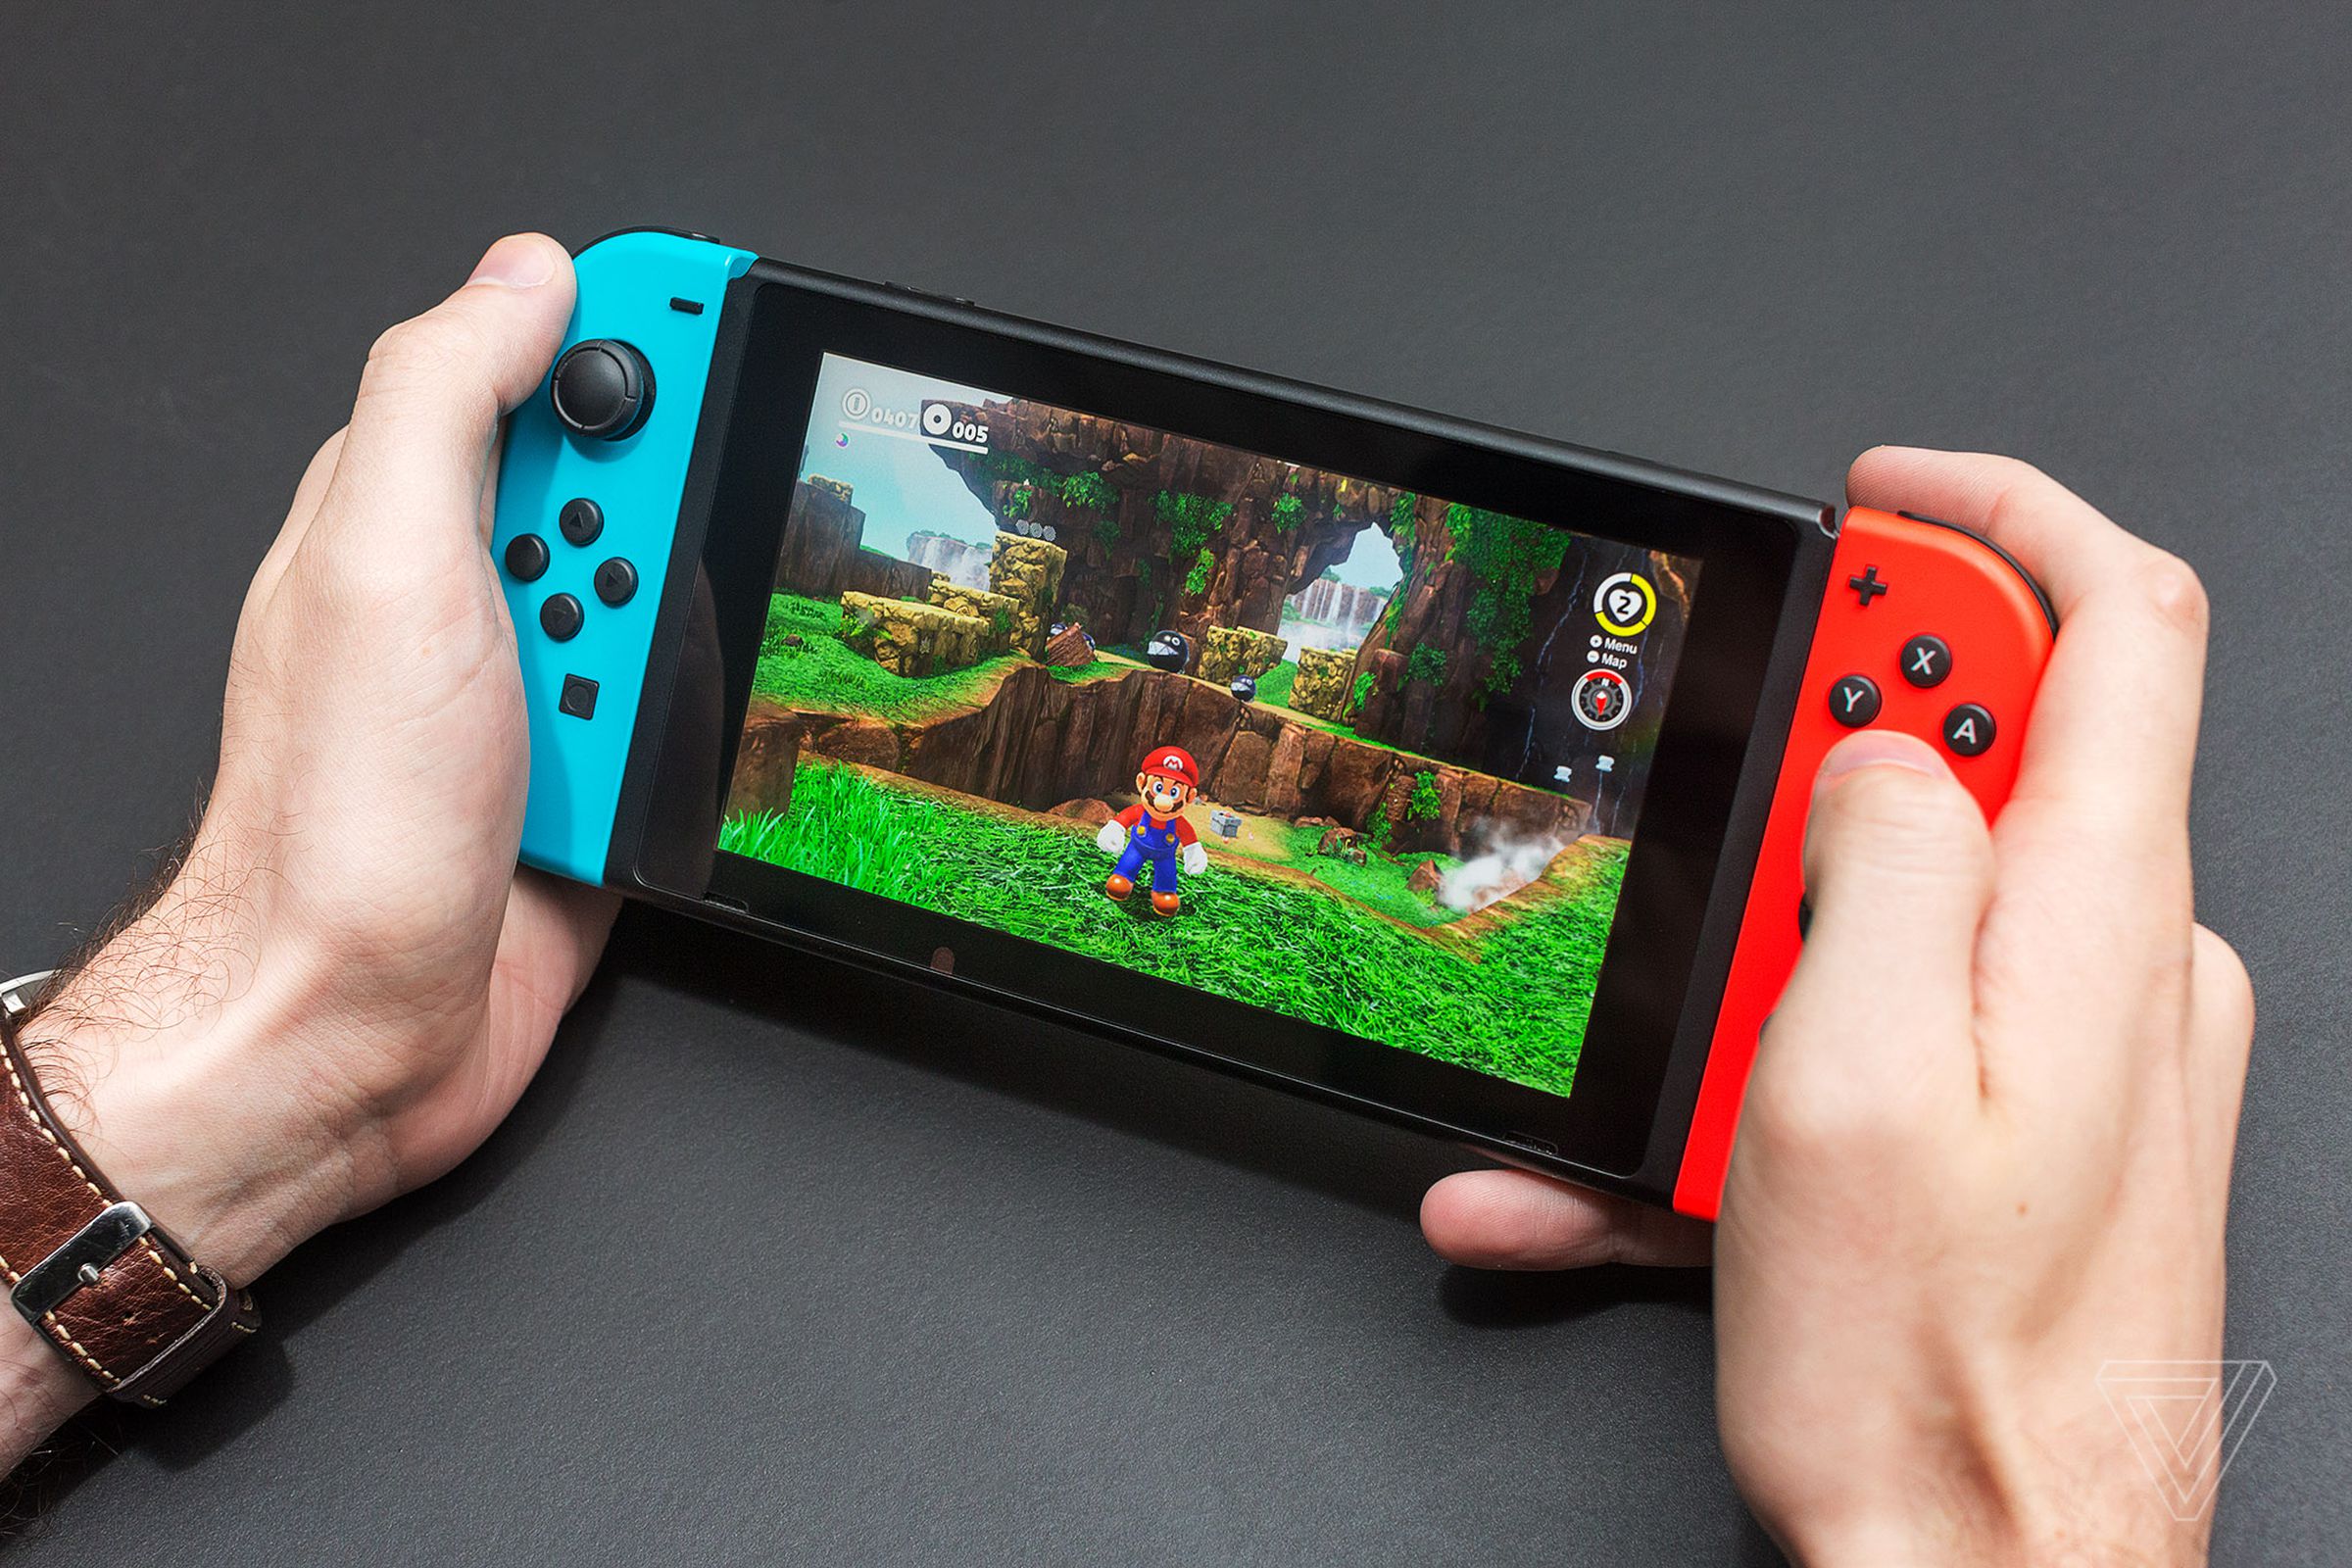 The Switch doesn’t include a screen protector, so make that one of the first things you buy.